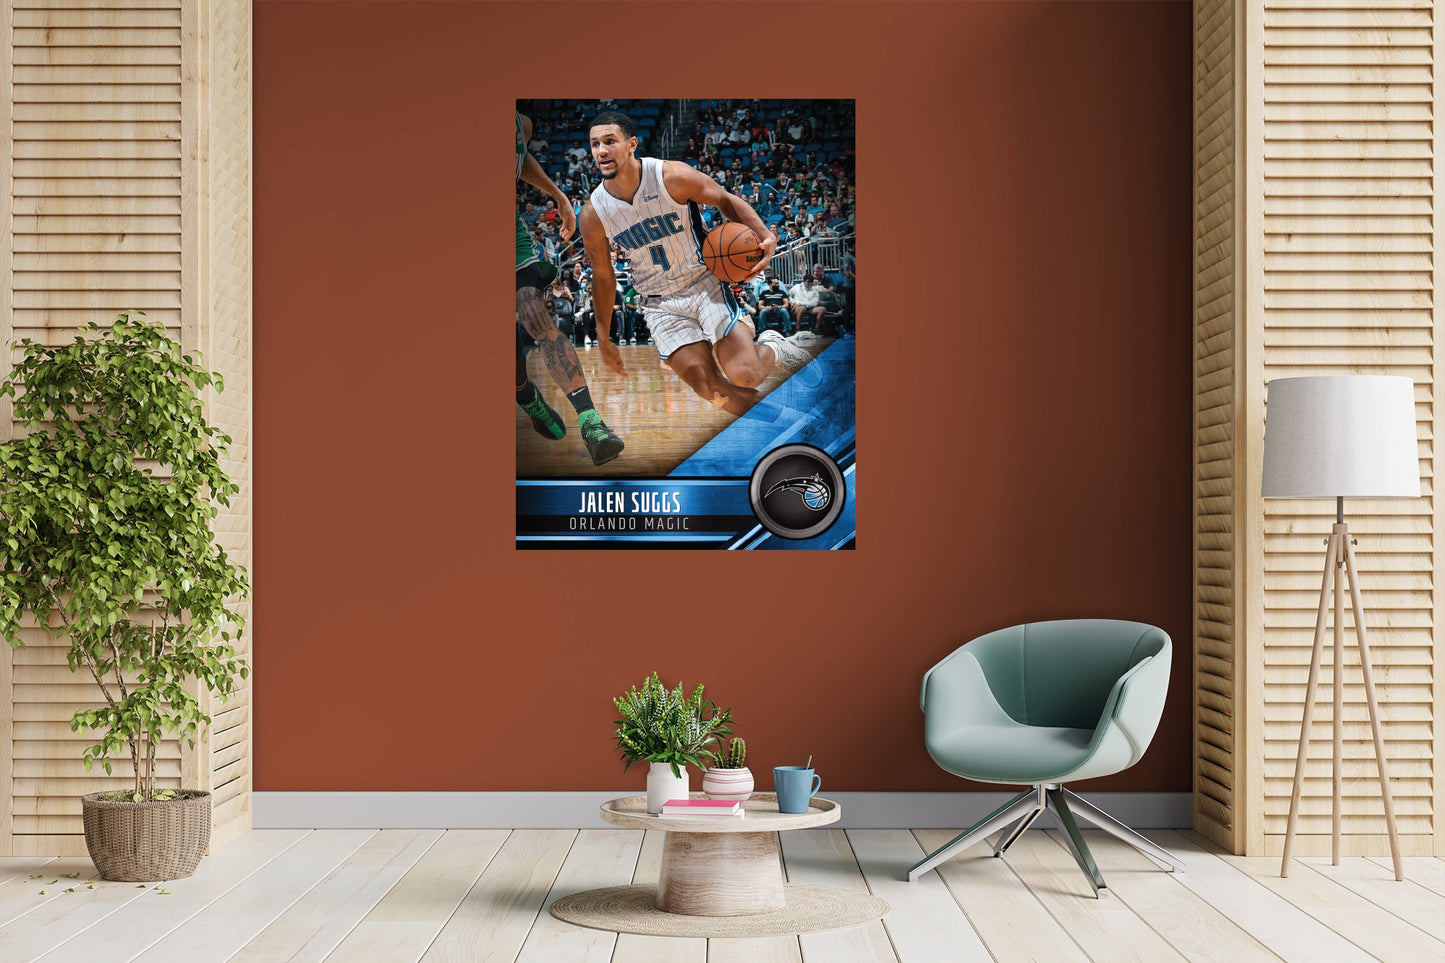 Orlando Magic: Jalen Suggs Poster - Officially Licensed NBA Removable Adhesive Decal